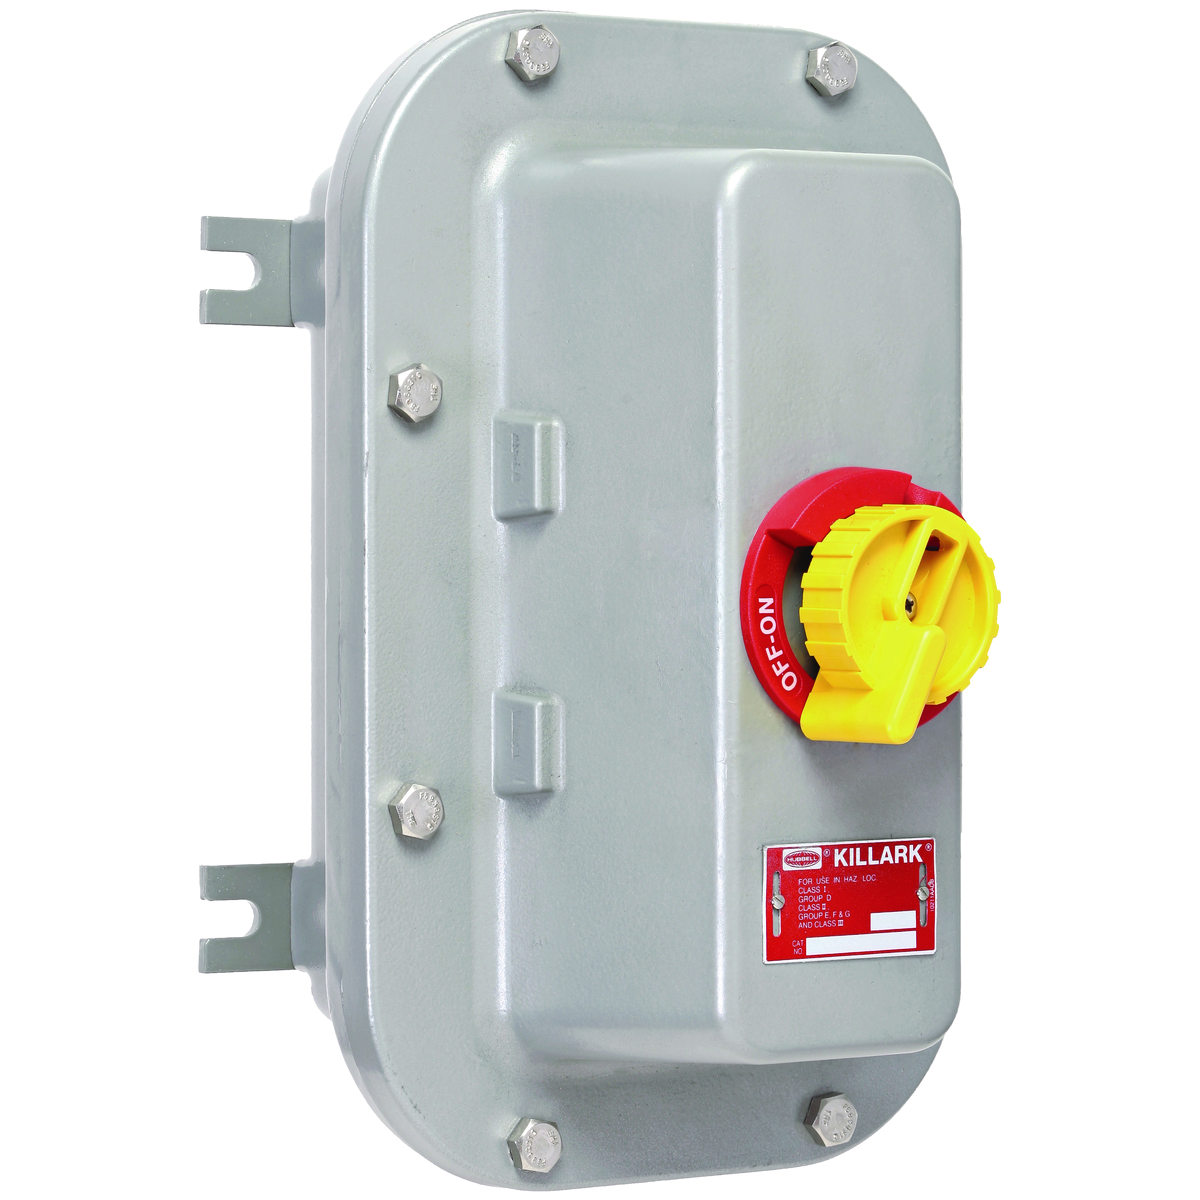 B7NFD SERIES - ALUMINUM FEED-THRU COMPACT NON-FUSED DISCONNECT SWITCHENCLOSURE WITH ABB SWITCH - 60A/3P/600VAC/40HP MAX